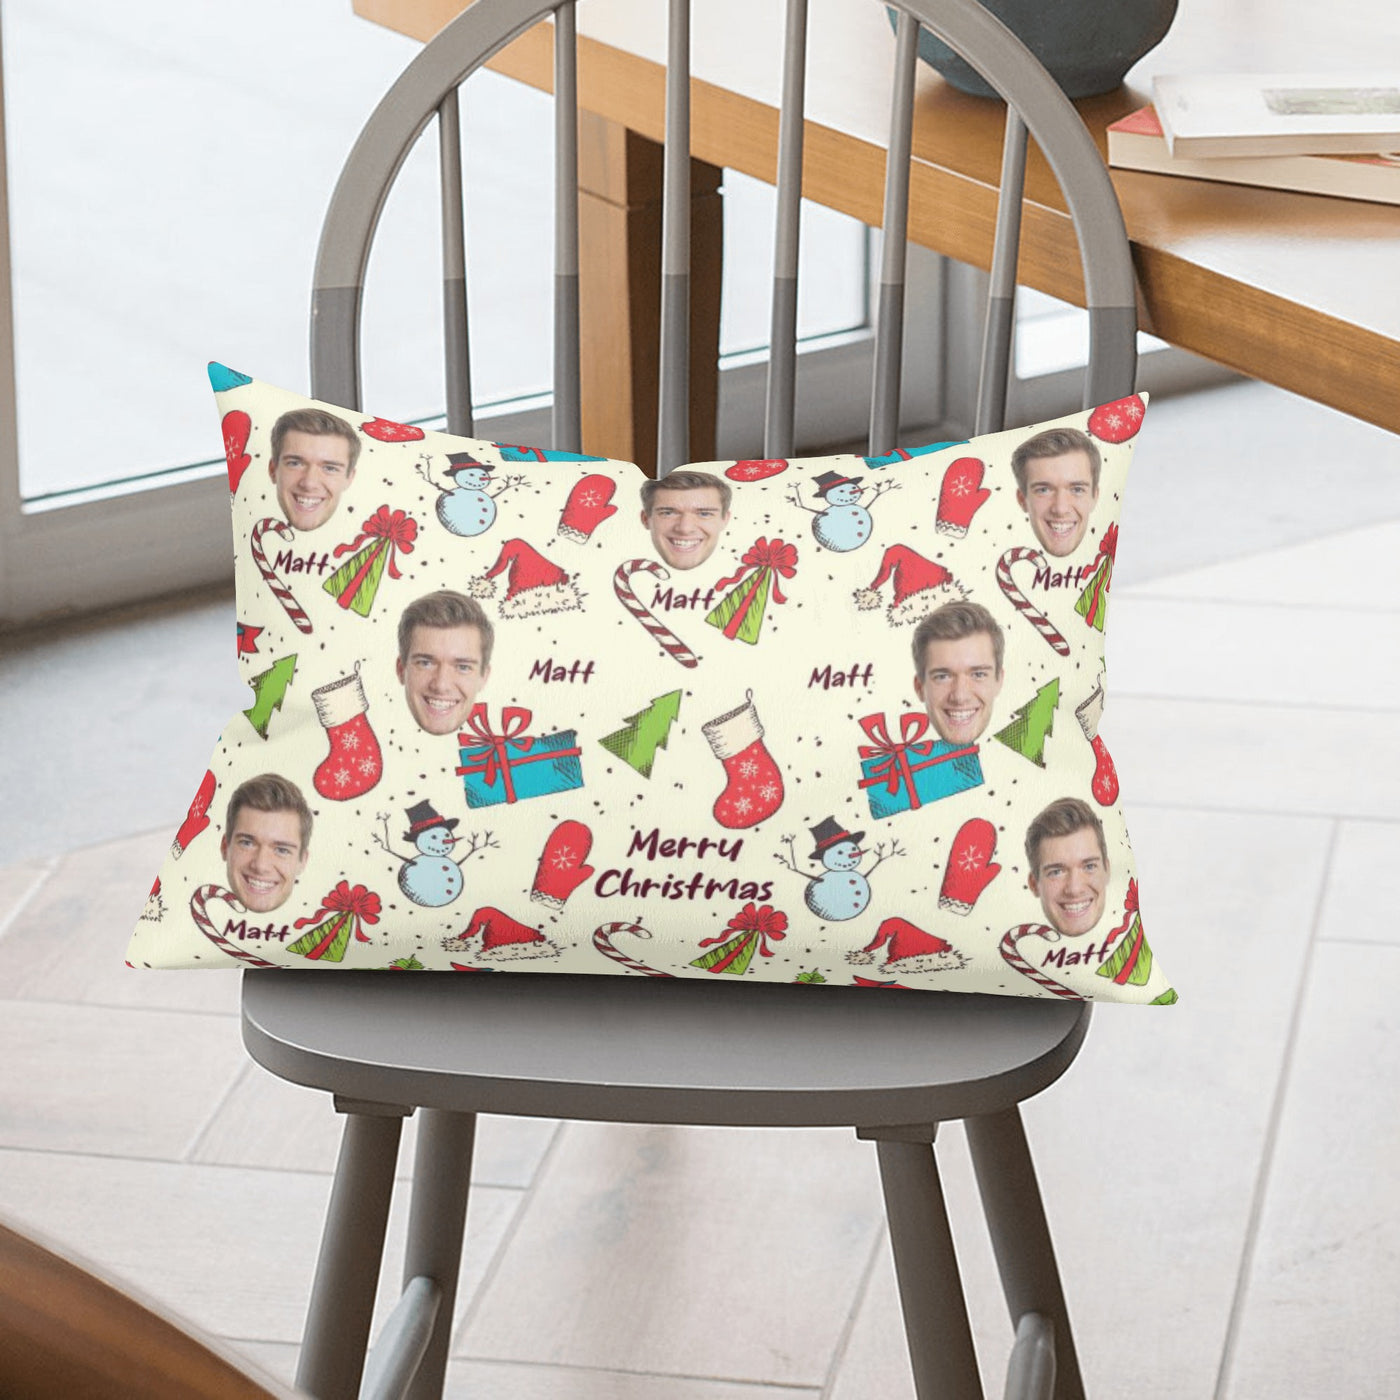 Personalised Double Side Printing Rectangular Pillow Cover (45 days pre-order)